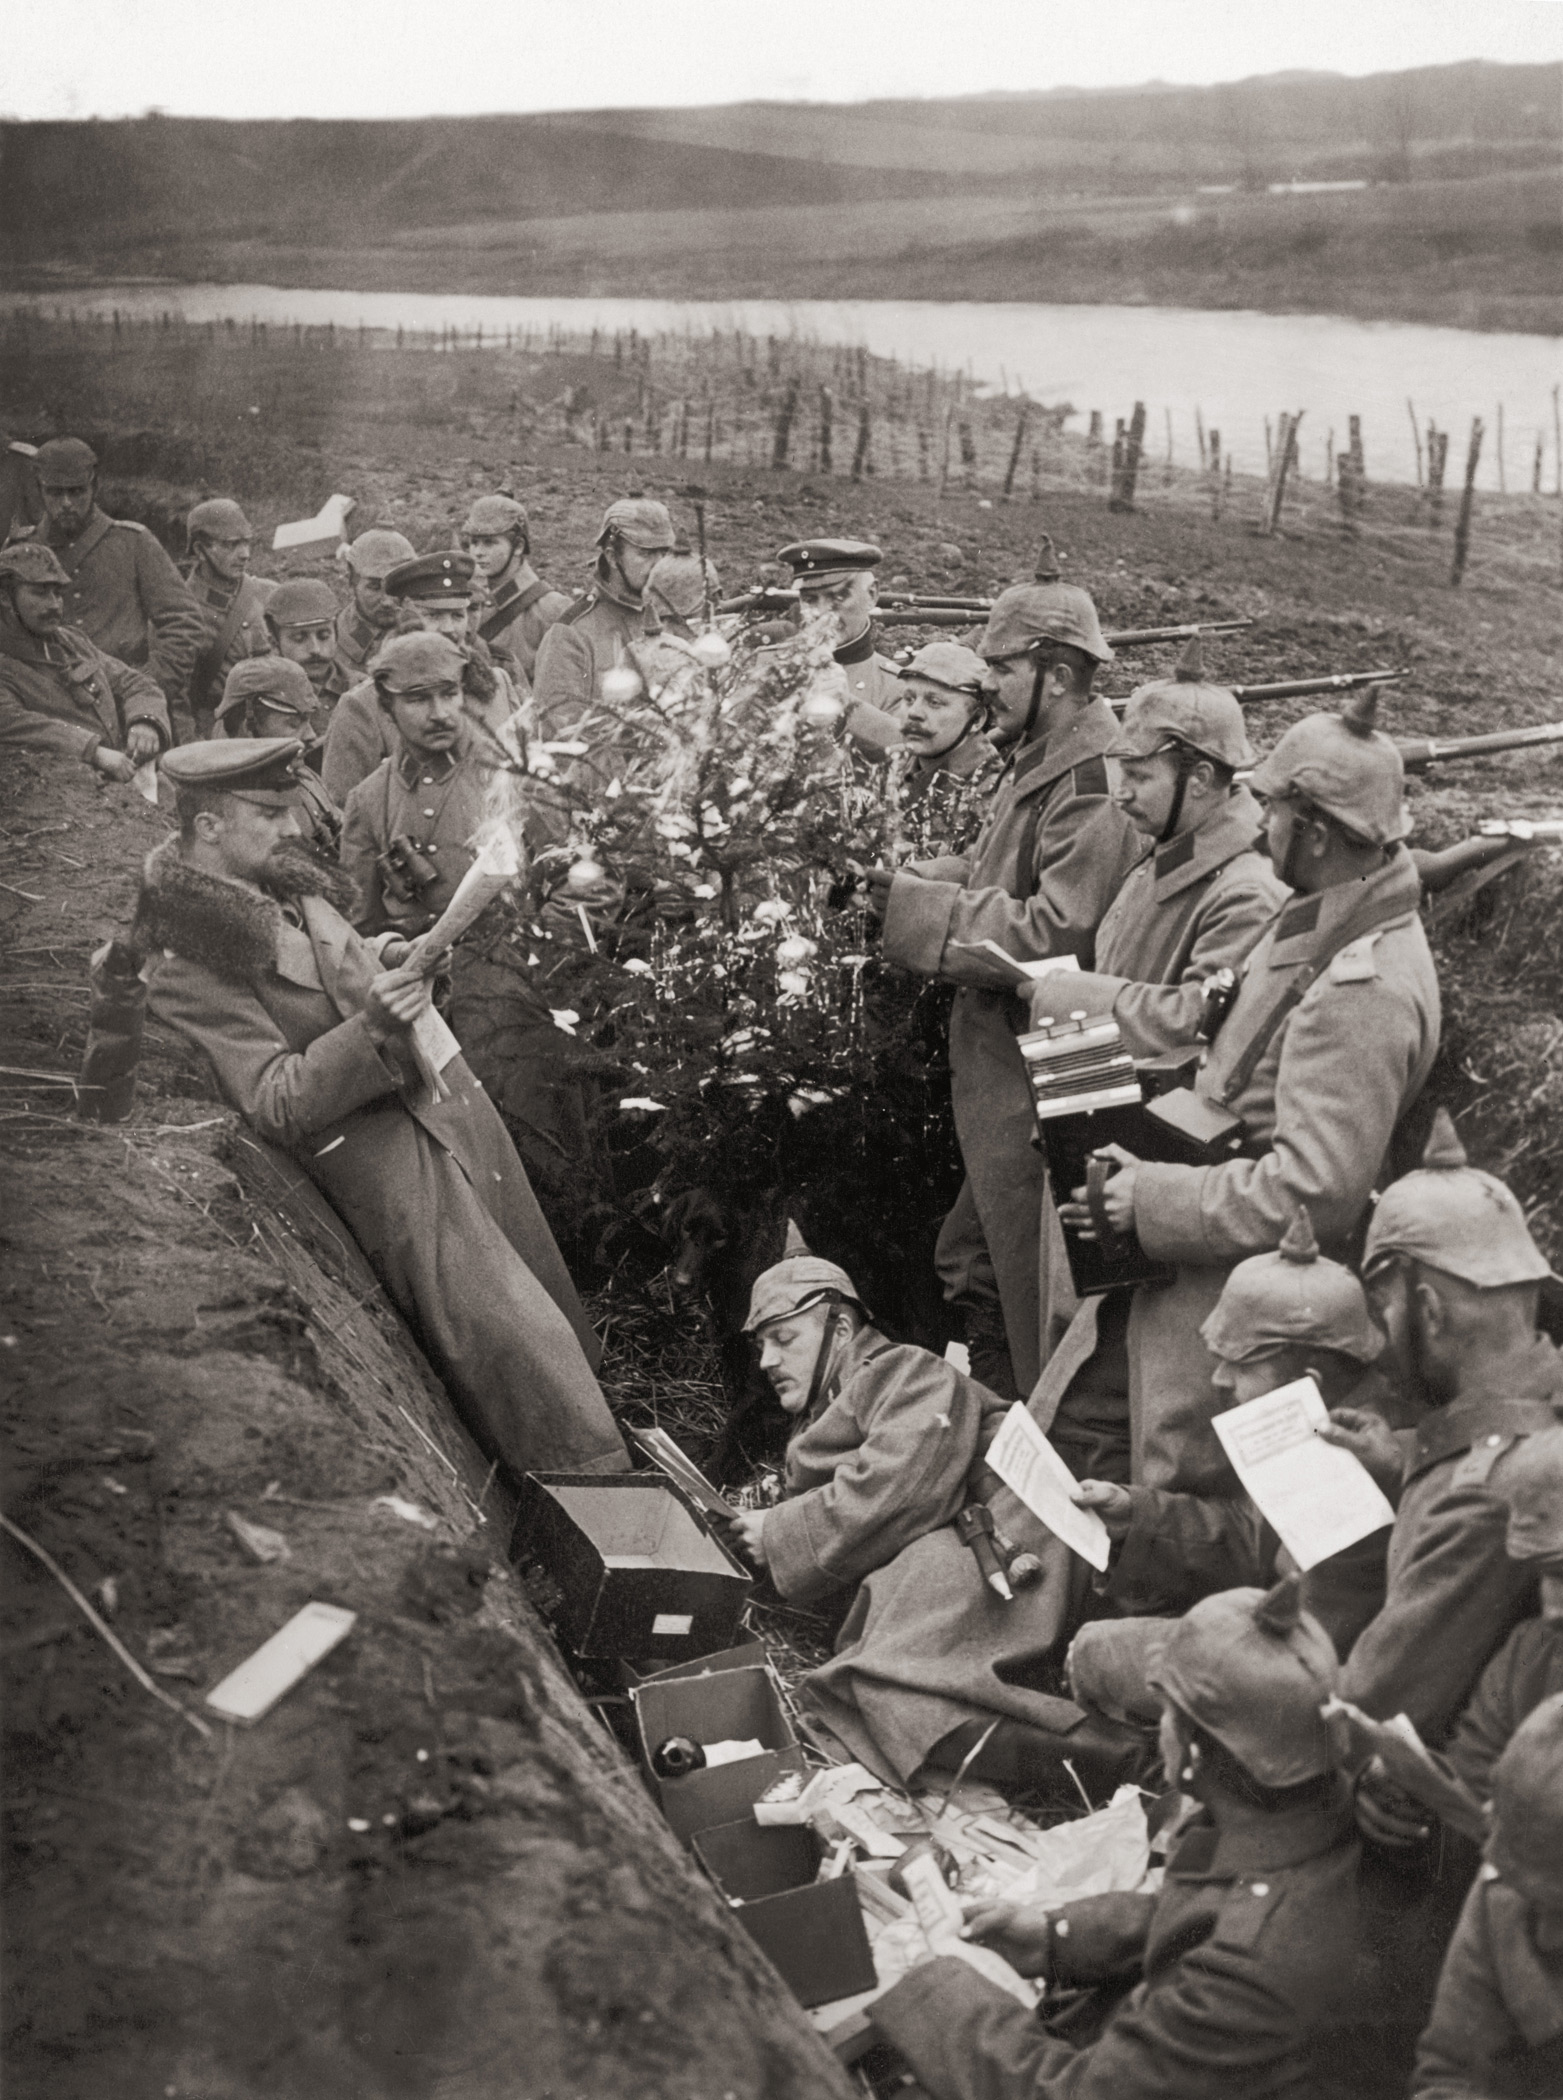 German troops singing around a Christmas tree in their trench on the Eastern Front during World War I.